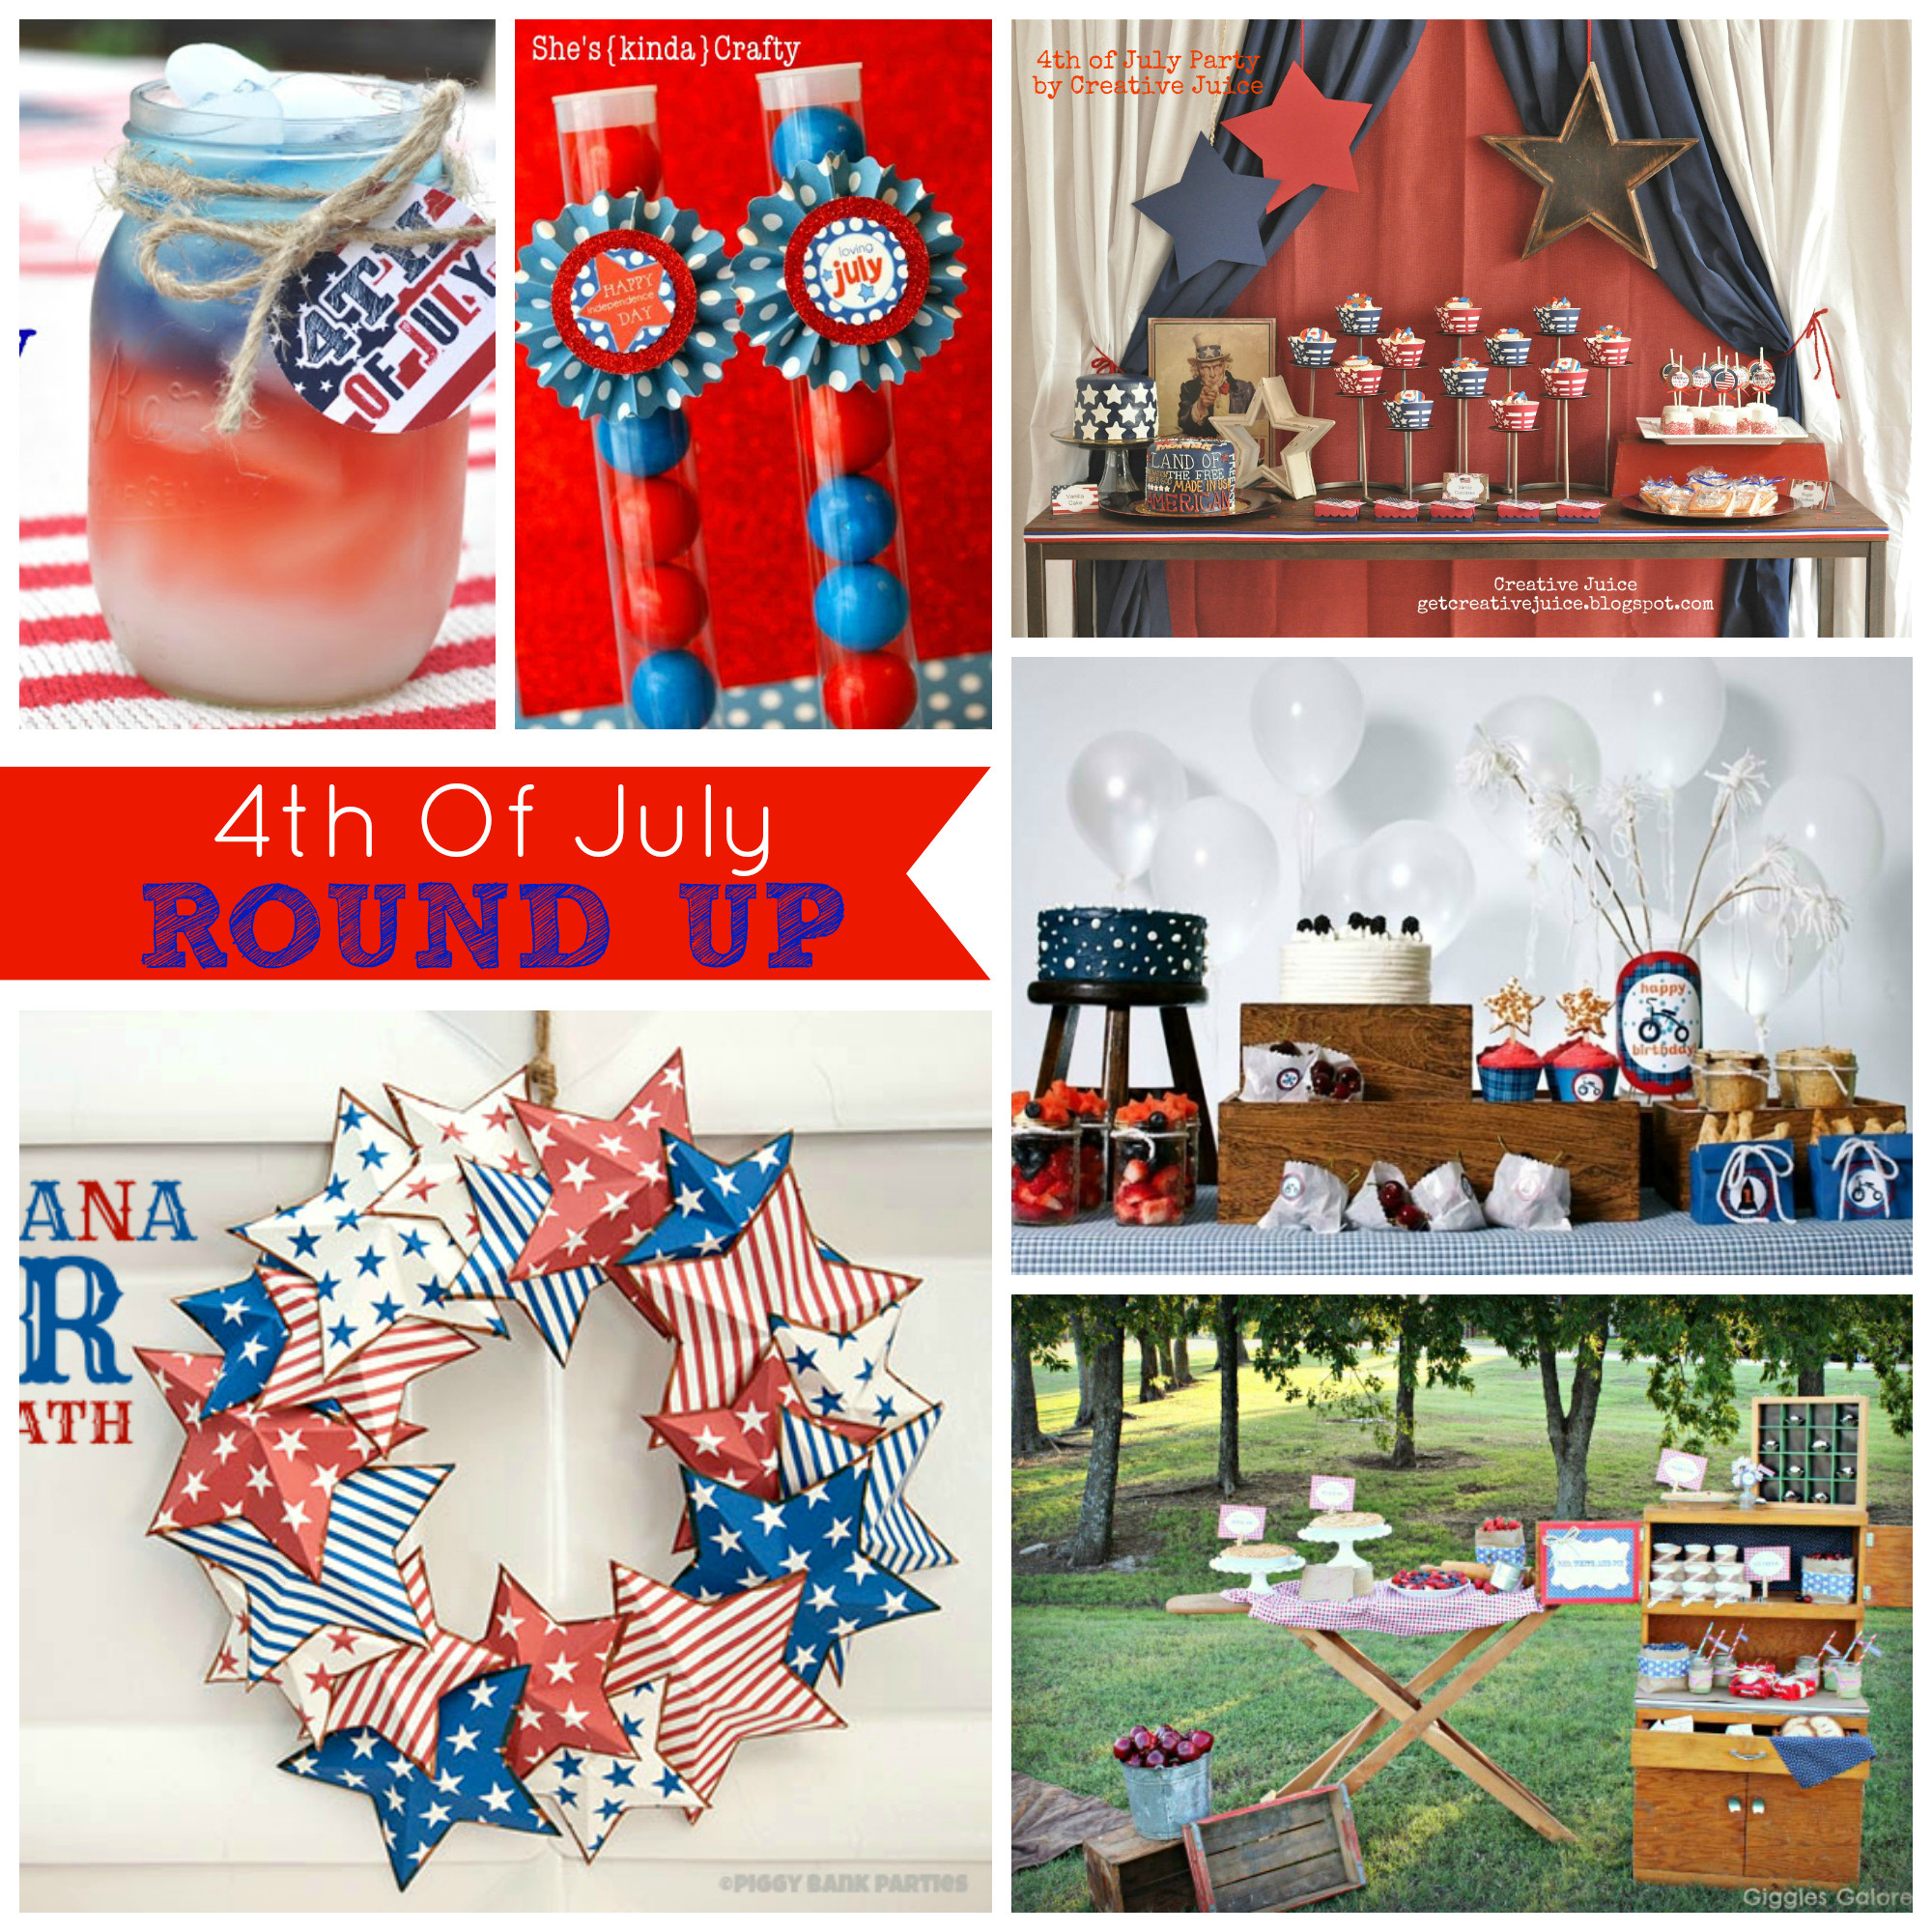 4th Of July Party Decorations
 Cupcake Wishes & Birthday Dreams Weekly Round Up 15